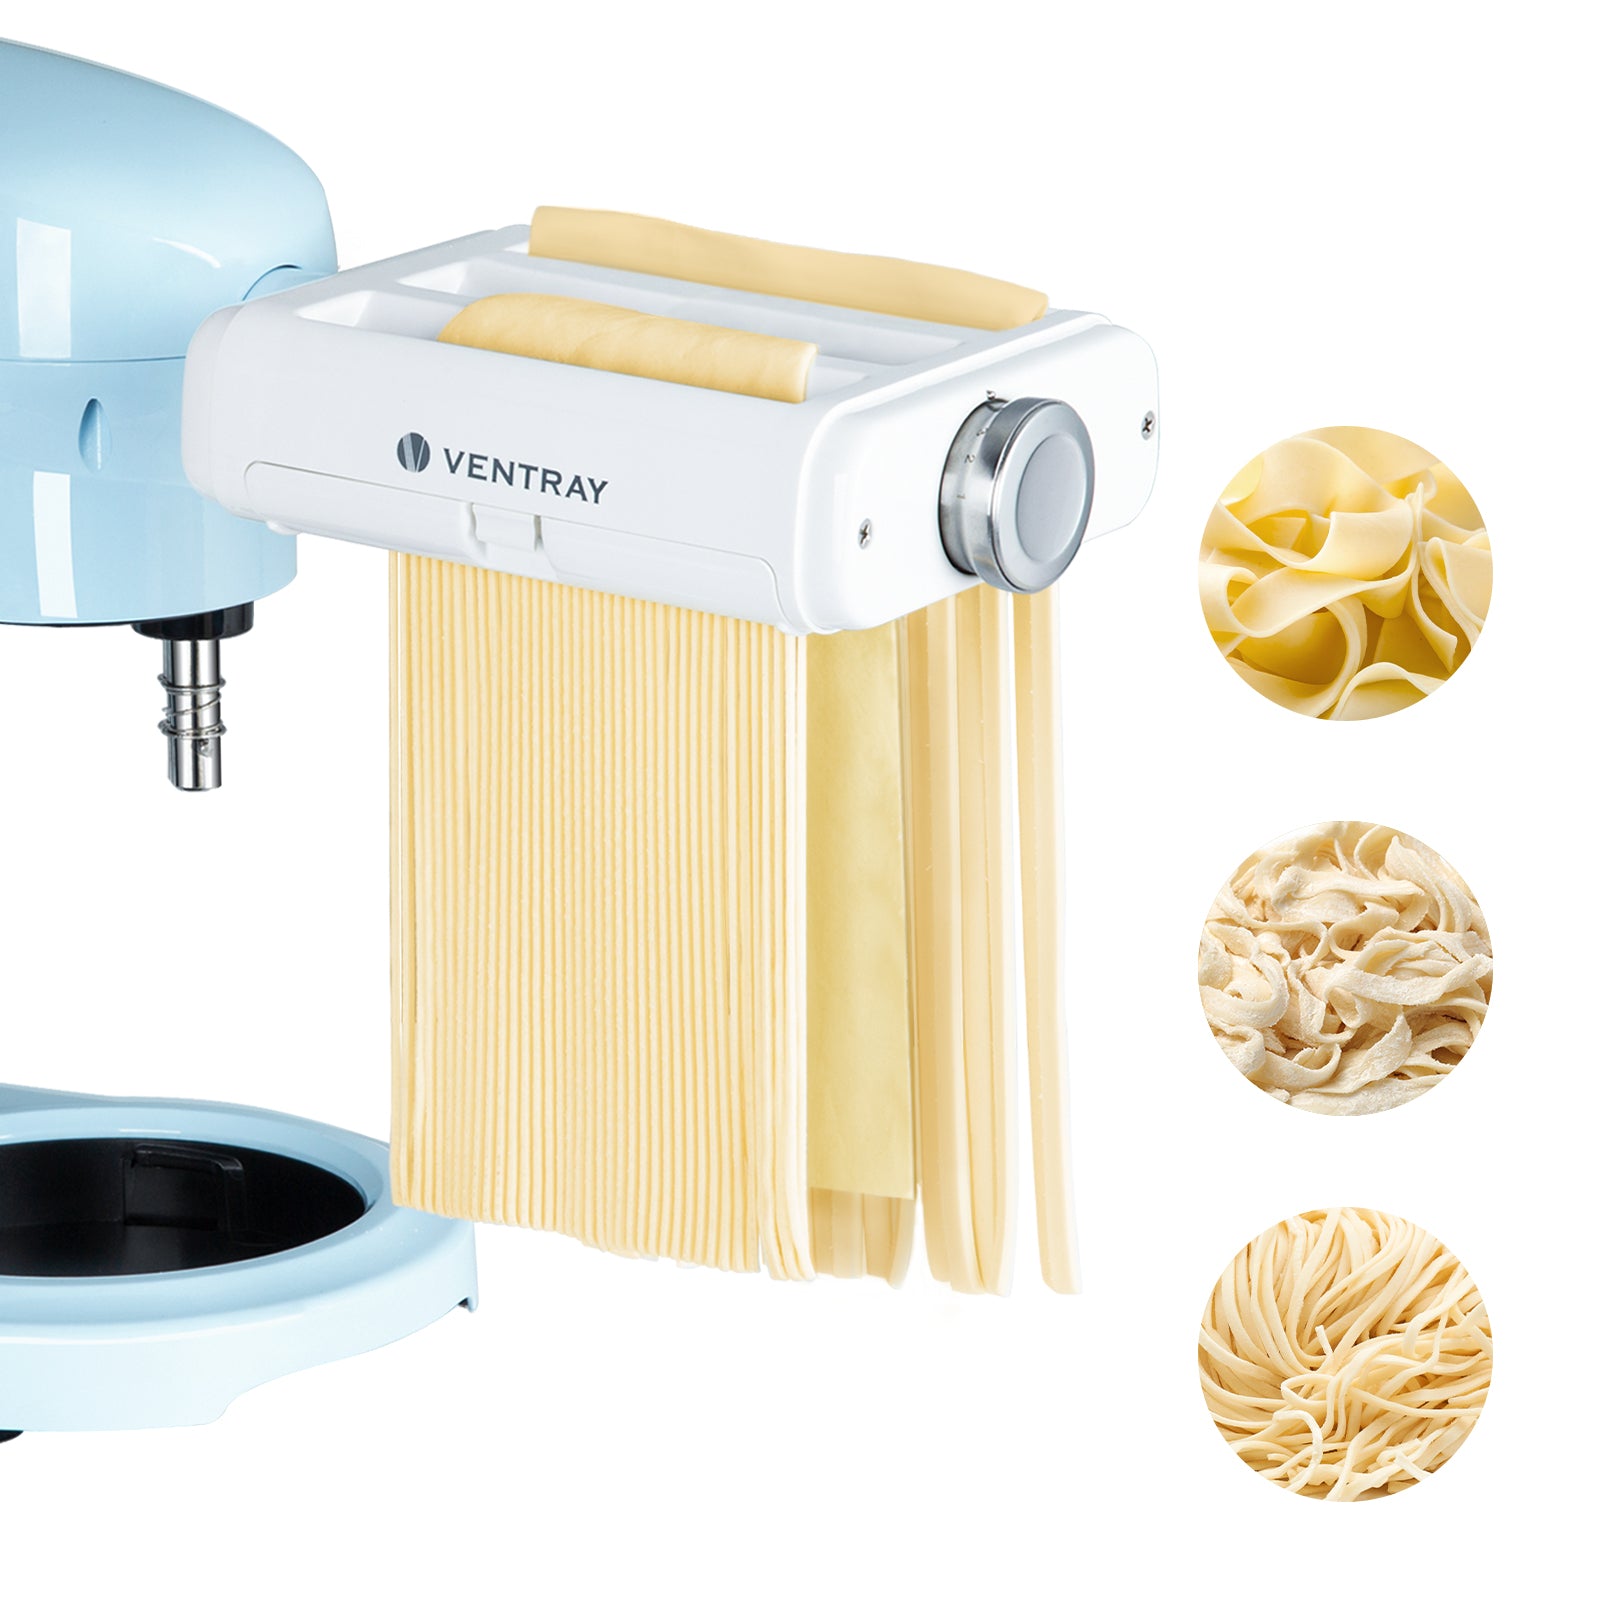 Instant® Pasta Accessory Set for Stand Mixer Pro